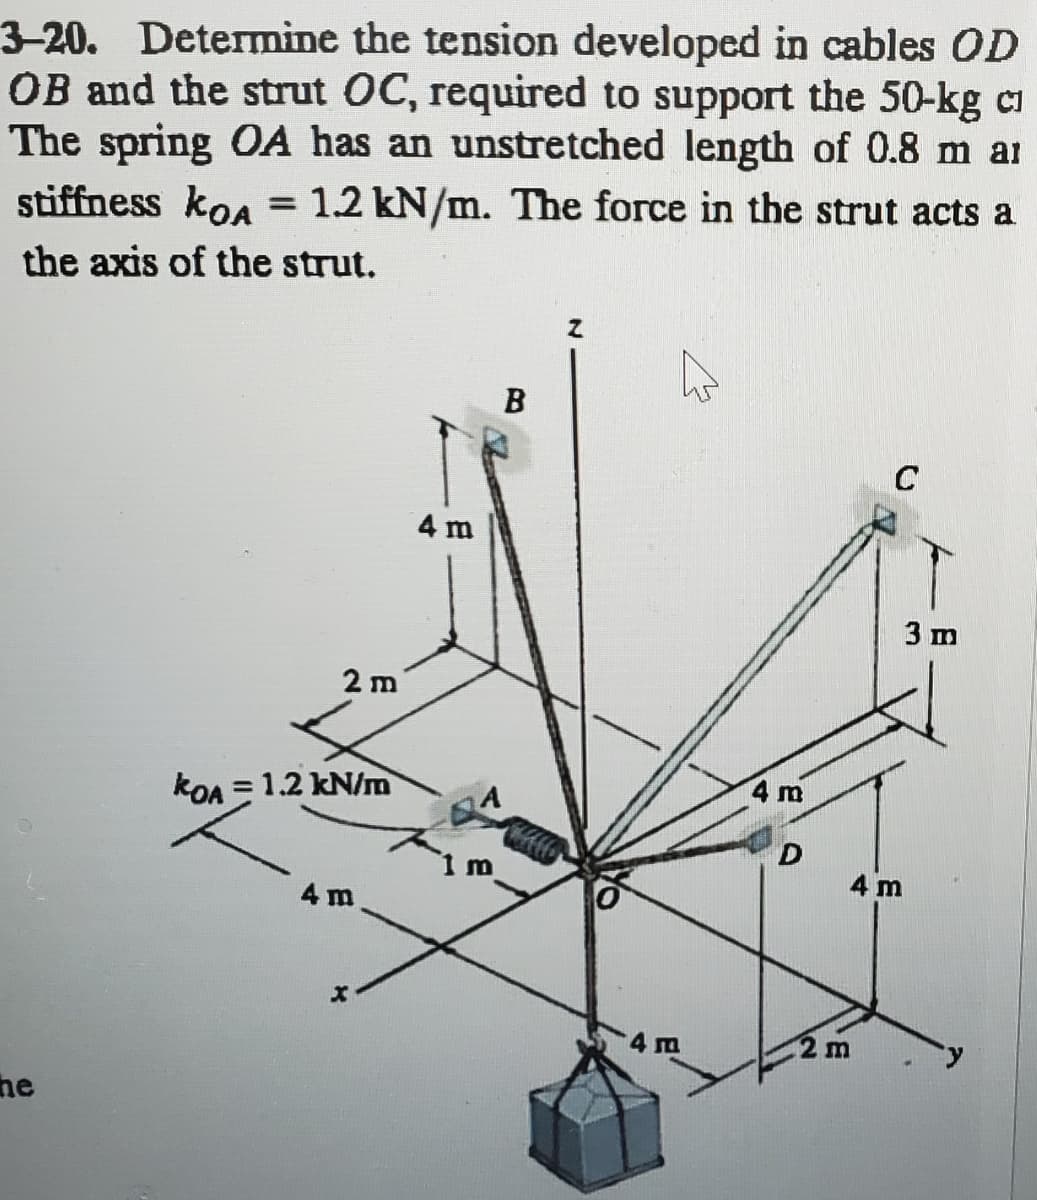 3-20. Determine the tension developed in cables OD
OB and the strut OC, required to support the 50-kg c
The spring OA has an unstretched length of 0.8 m ar
stiffness kon = 1.2 kN/m. The force in the strut acts a
the axis of the strut.
he
2 m
KOA = 1.2 kN/m
4 m
X
4 m
1 m
B
FELLO
4 m
4 m
D
C
2 m
3 m
4 m